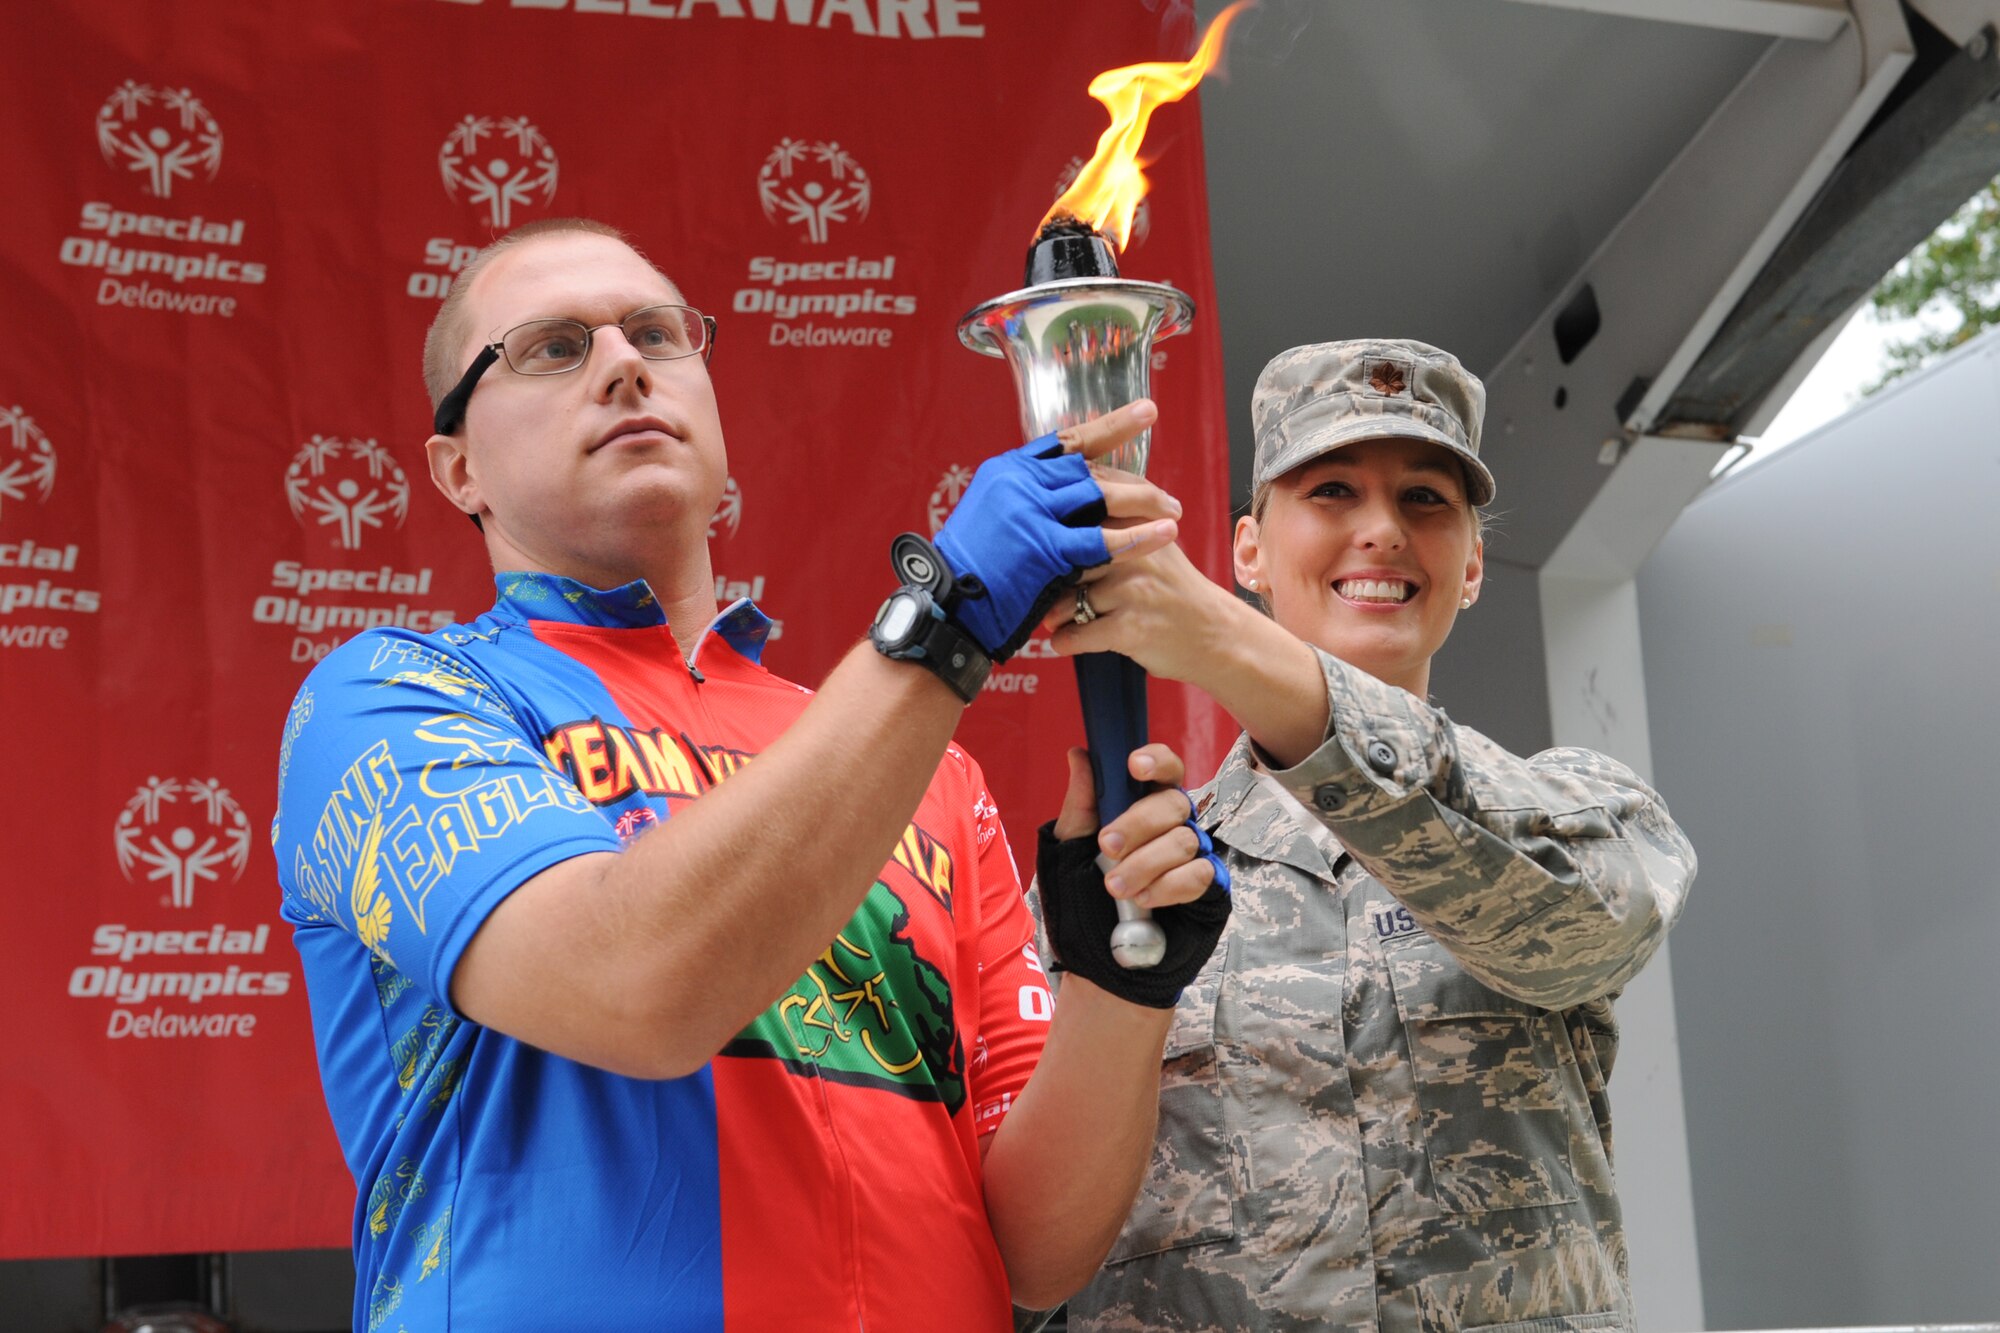 Maj. Rayna Lowery, 436th Logistics Readiness Squadron commander, passes the Special Olympics torch to Bobby Opiela, Special Olympics athlete from the Virginia team, during the Special Olympics of Delaware Cycling CompetitionSept. 13, 2014 at Dover Air Force Base, Del. Lowery was at the competition to officially proclaim the games open. (U.S. Air Force photo/Staff Sgt. Elizabeth Morris)